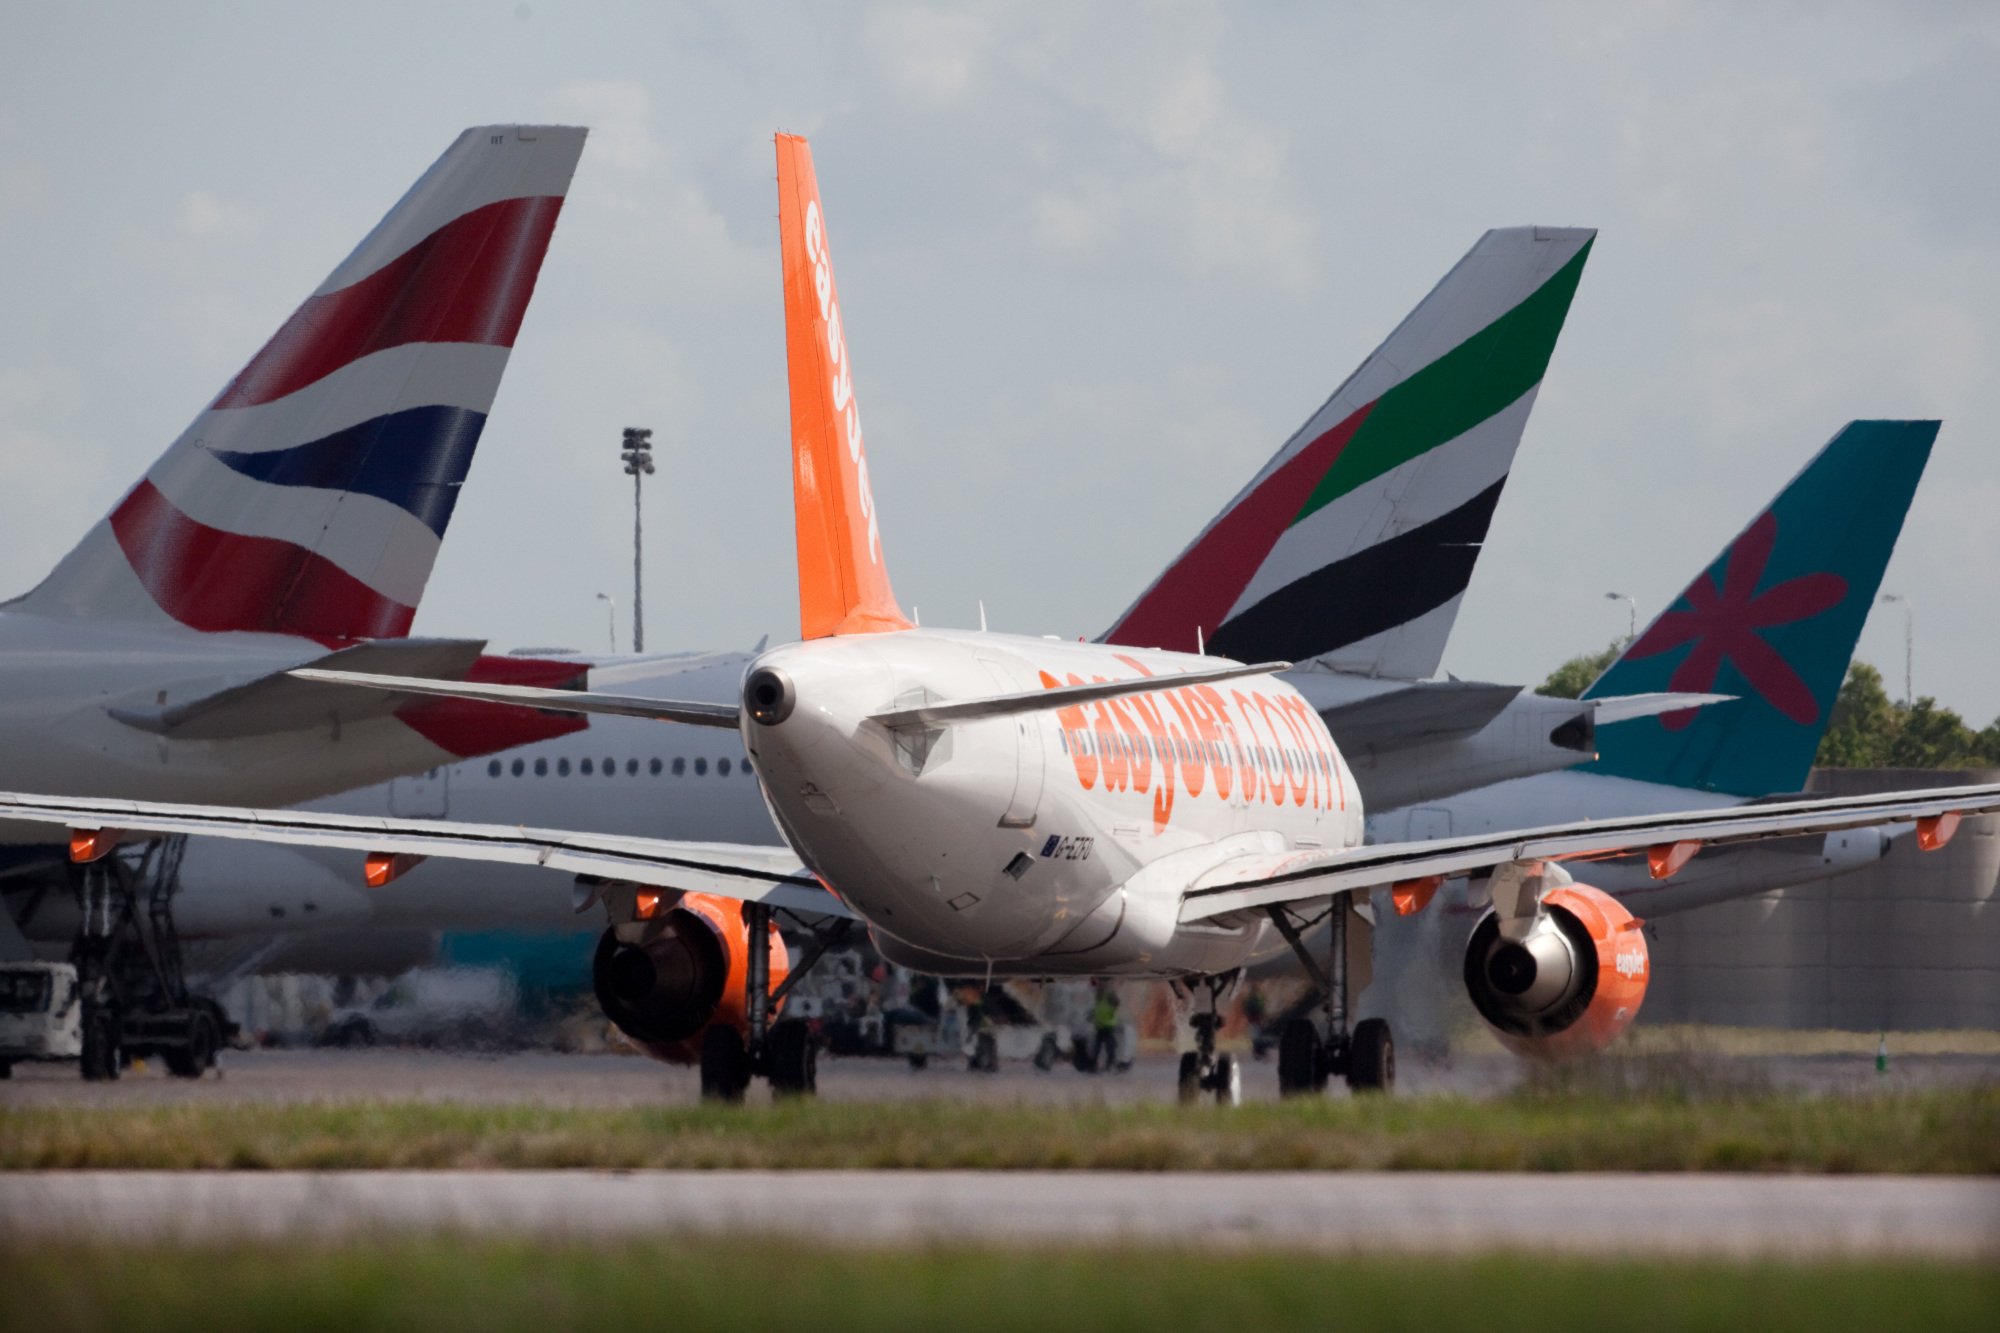 EasyJet Passenger Dies at Gatwick Airport After Falling From Escalator